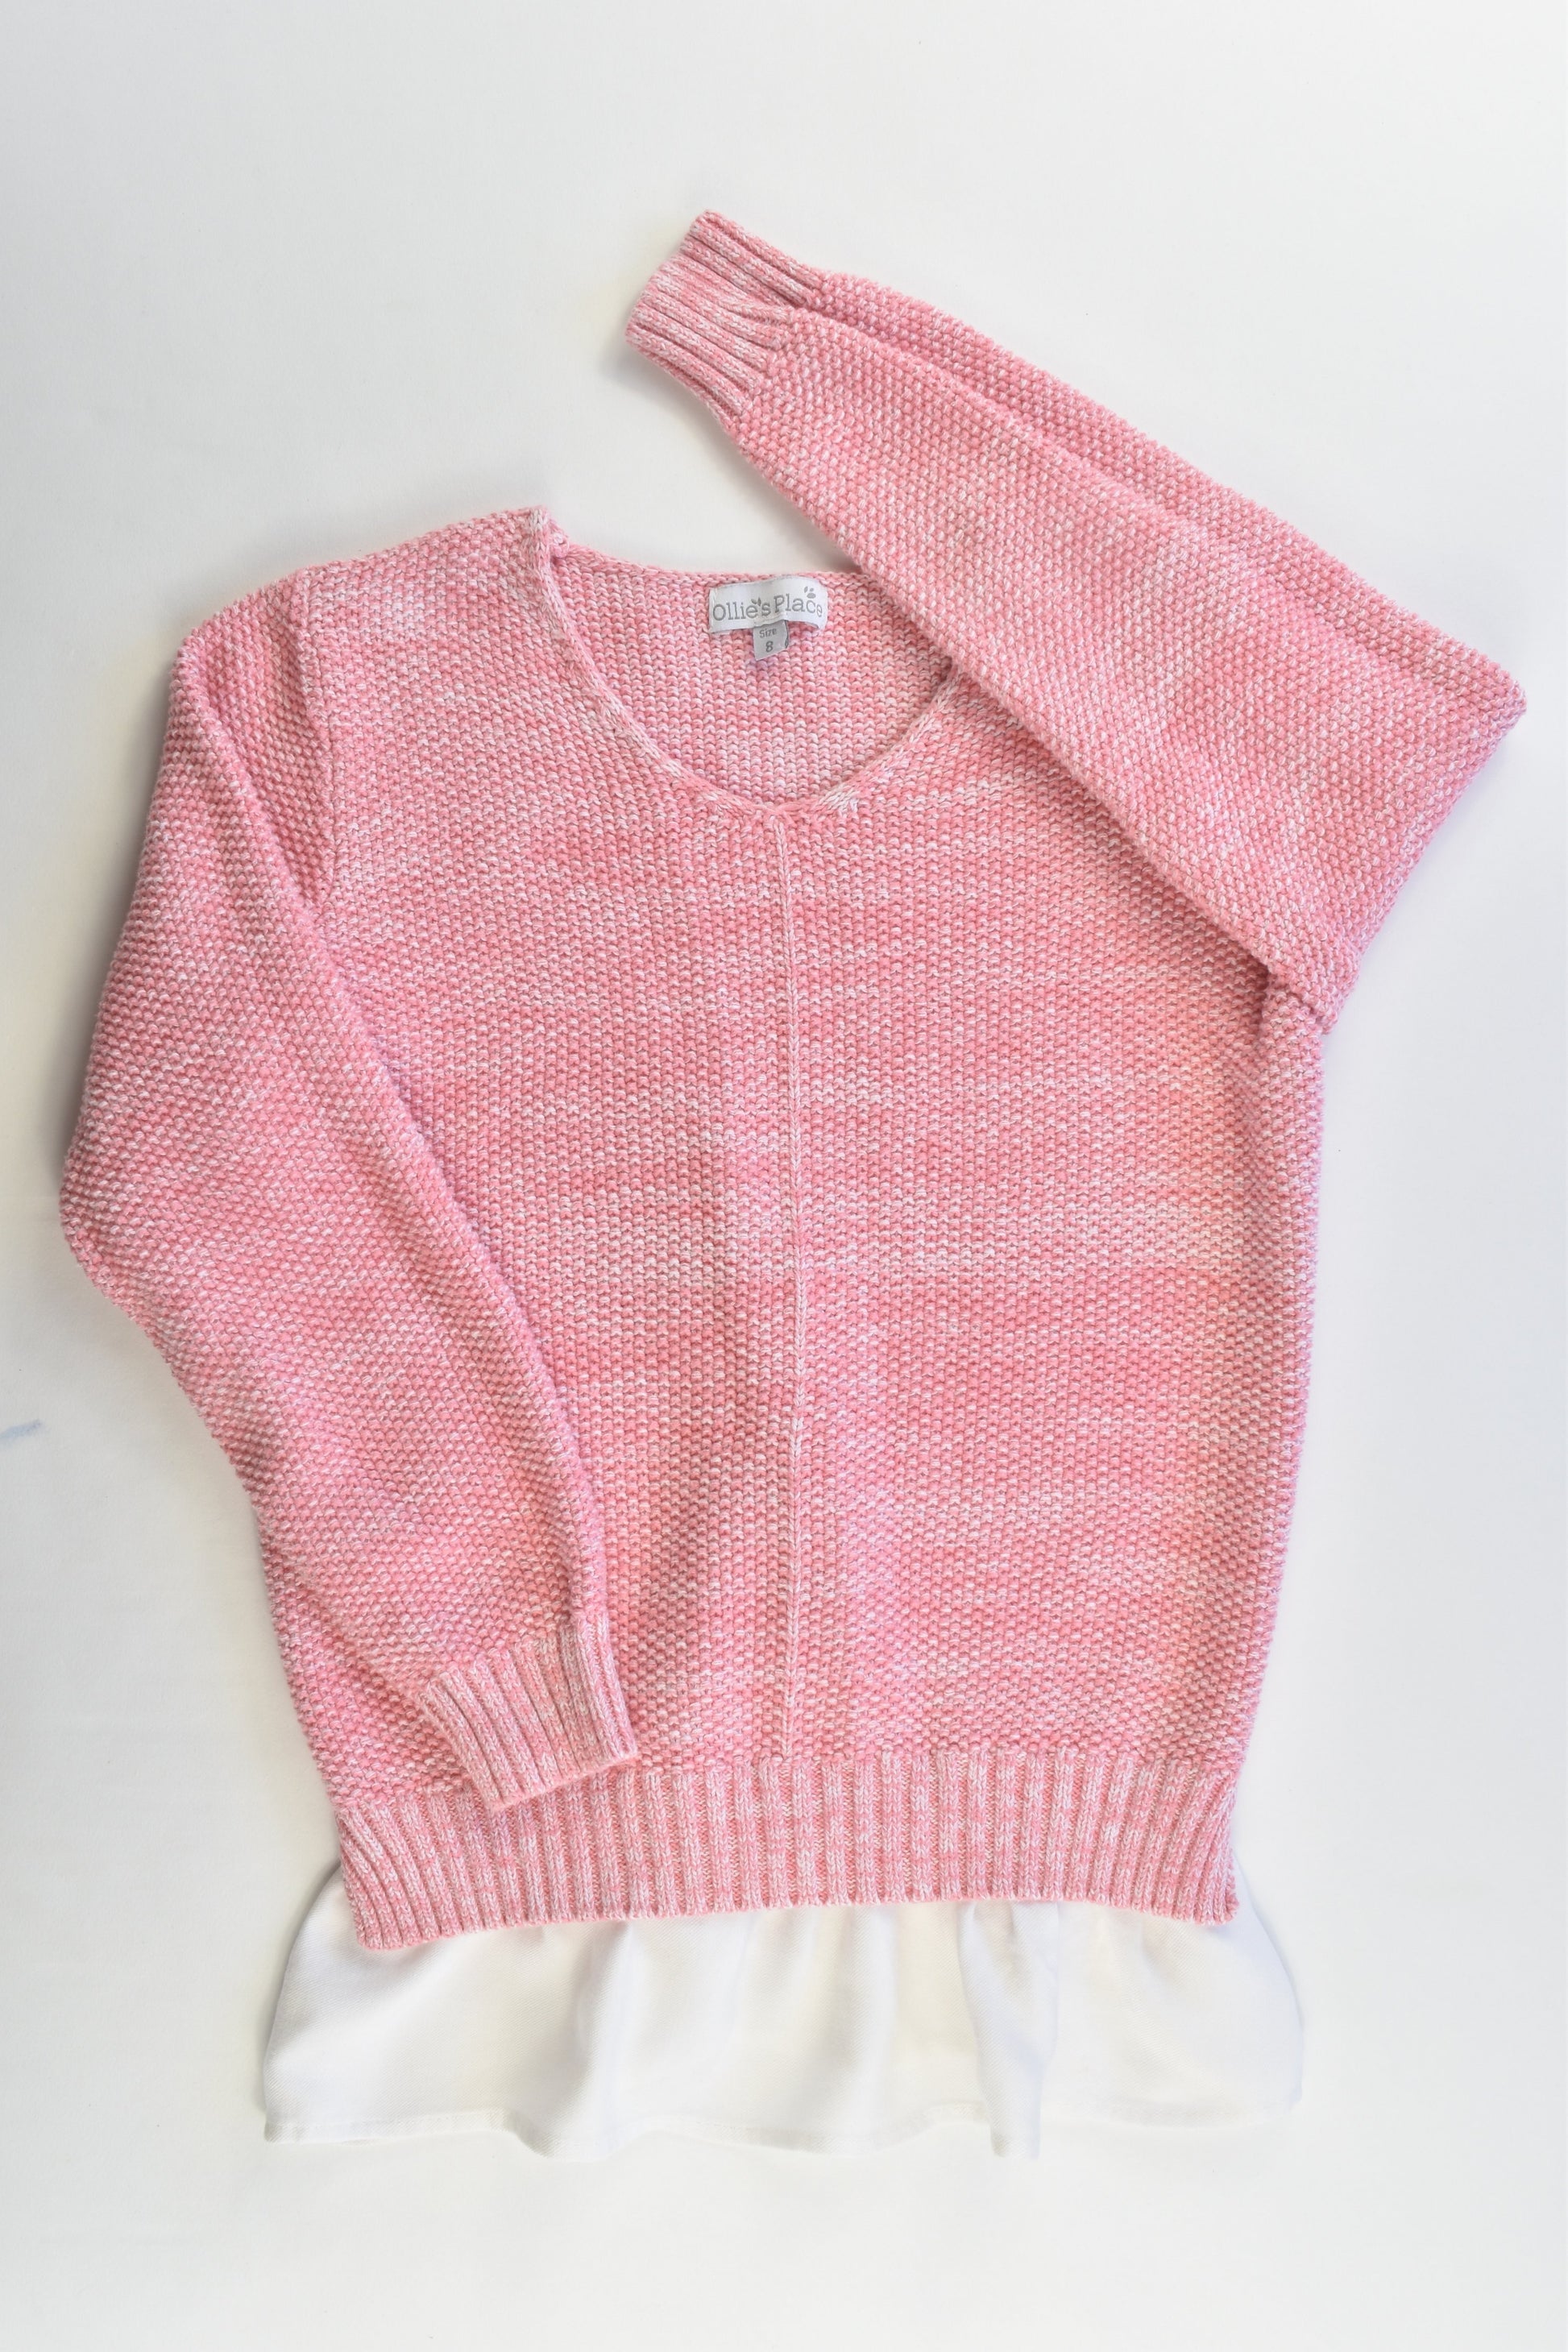 Ollie's Place Size 8 Knitted Jumper